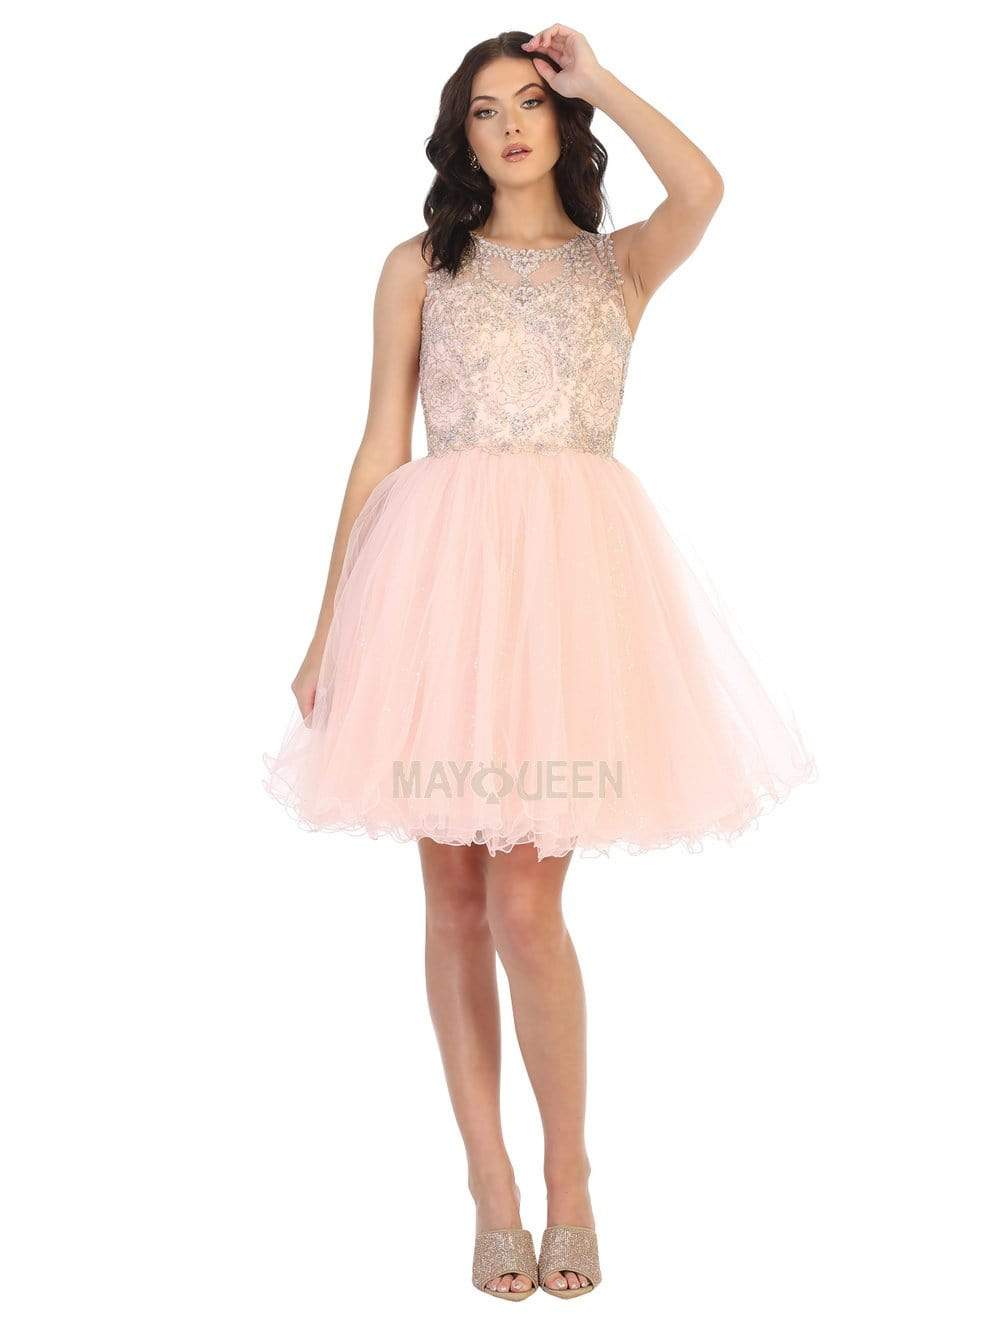 May Queen - MQ1726 Rosette Appliqued Glitter Tulle Dress Cocktail Dresses 4 / Blush